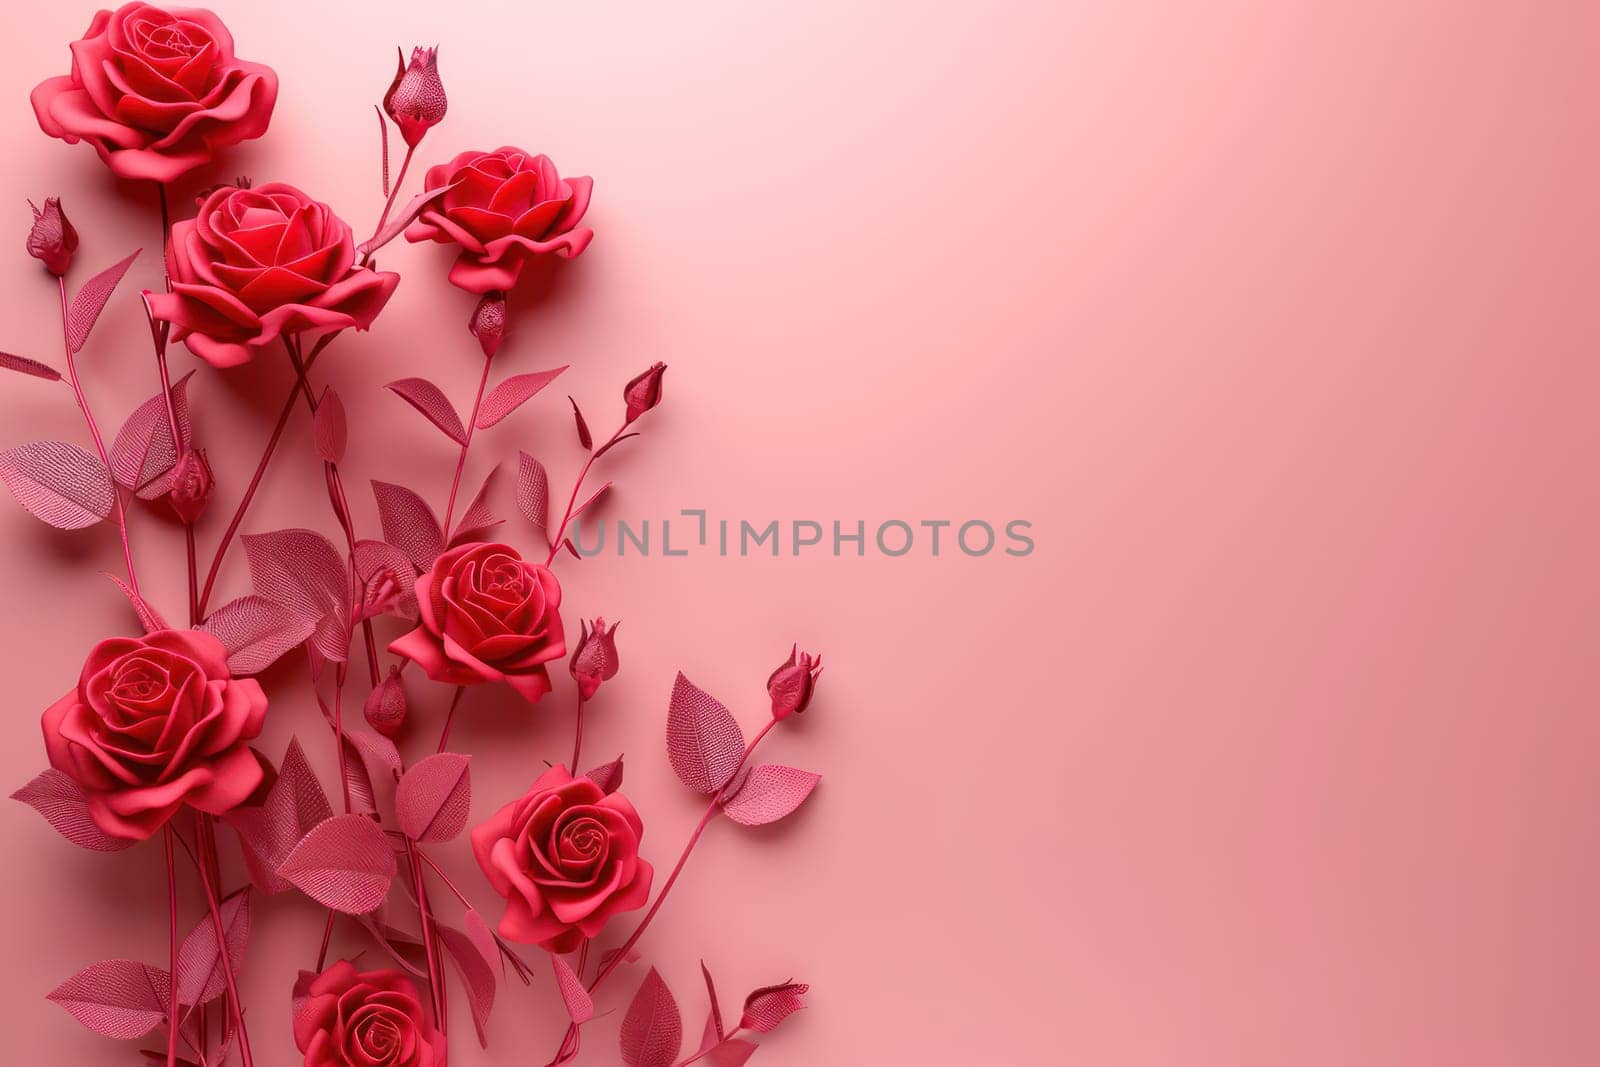 Roses pink shadow over pink background by golfmerrymaker